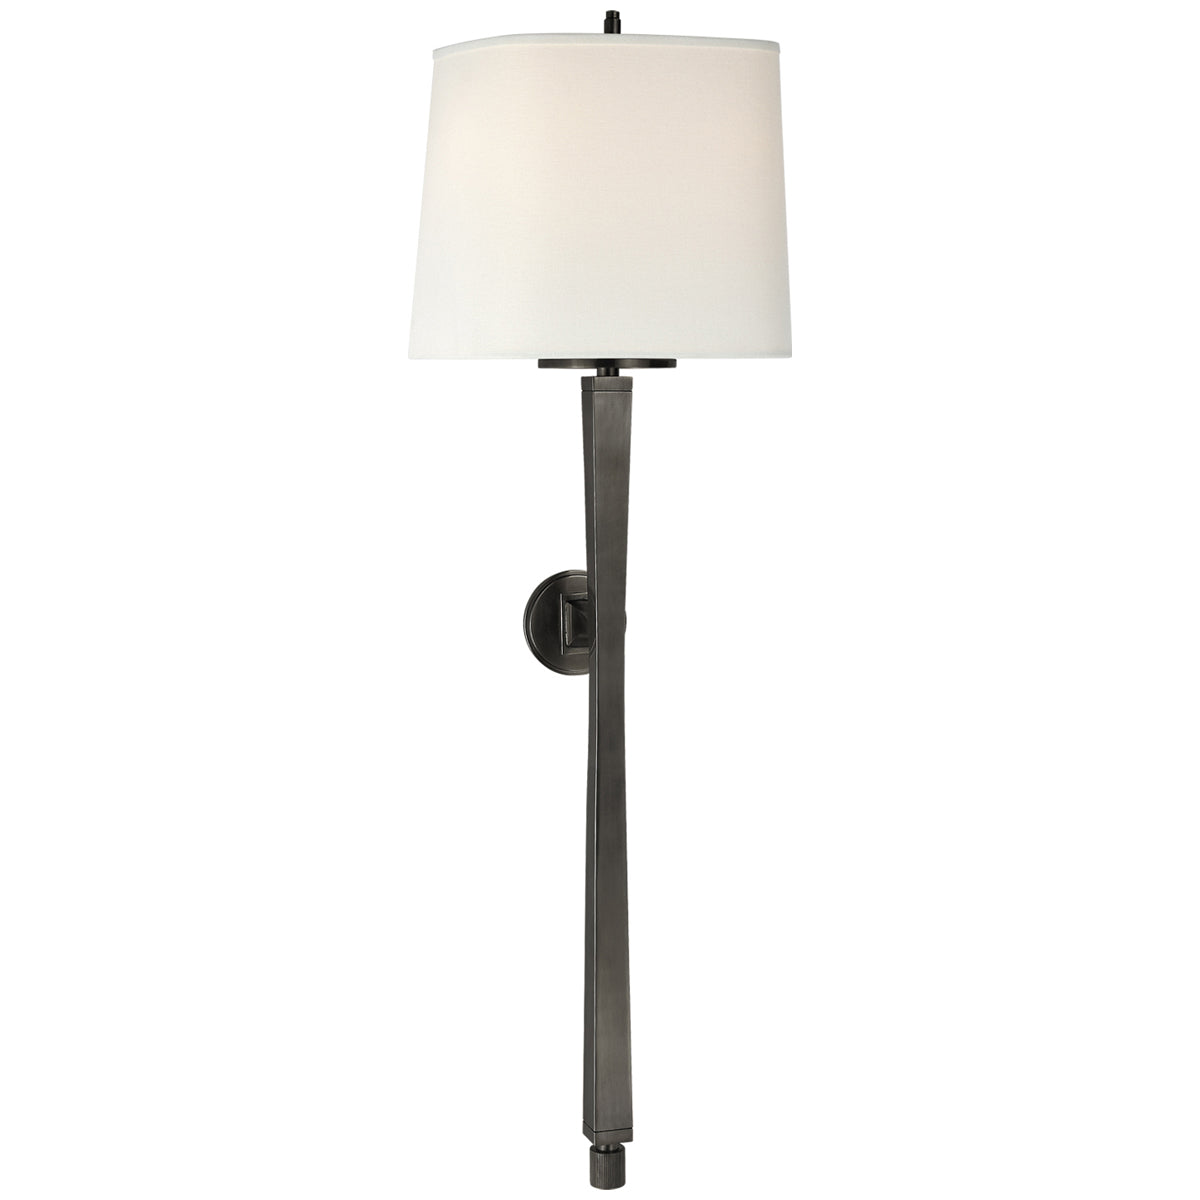 Visual Comfort Edie Baluster Sconce with Linen Shade